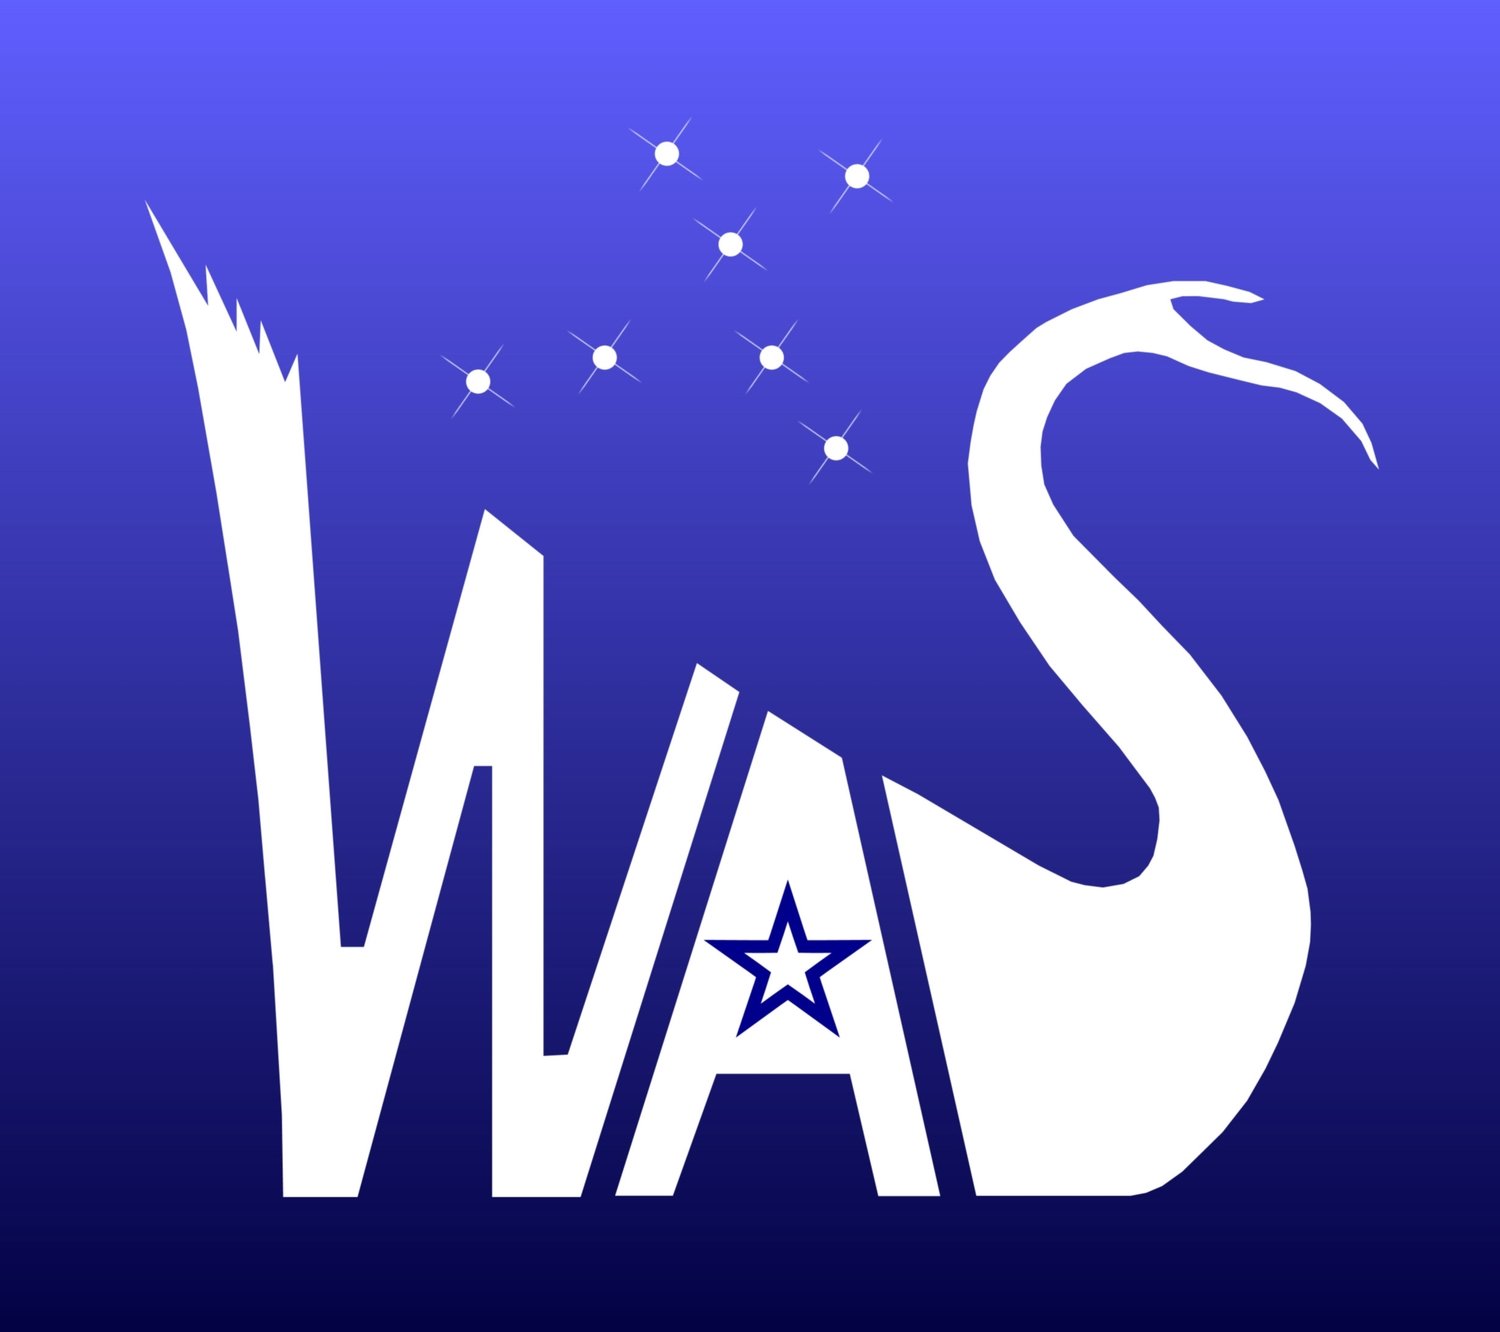 Wycombe Astronomical Society